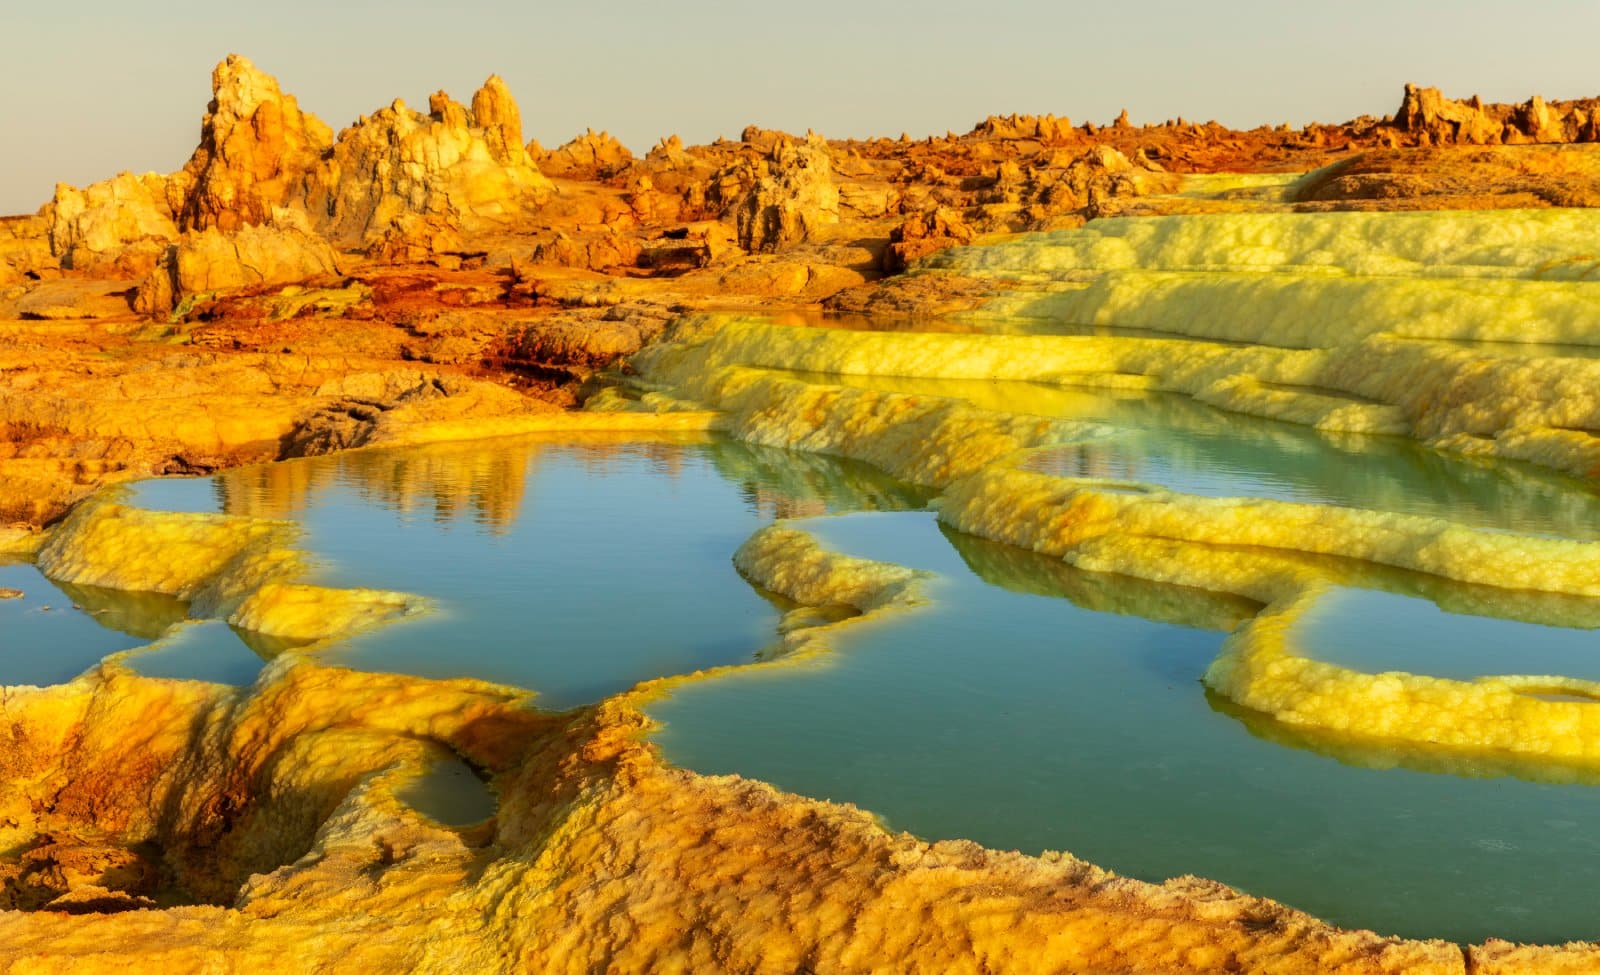 <p><span>One of the most alien landscapes on Earth, the Danakil Depression offers a vista of lava lakes, salt flats, and sulfur springs. This harsh but mesmerizing environment is not for the faint-hearted but rewards the adventurous with its otherworldly beauty. </span></p> <p><b>Insider’s Tip: </b><span>A guided tour is essential for navigating the extreme conditions and understanding the geological and cultural significance of the area. </span></p> <p><b>How to Get There: </b><span>Organized tours typically depart from Mekele, accessible by flight or bus from Addis Ababa.</span></p> <p><b>When to Travel: </b><span>Visit from November to February when temperatures are slightly cooler.</span></p>